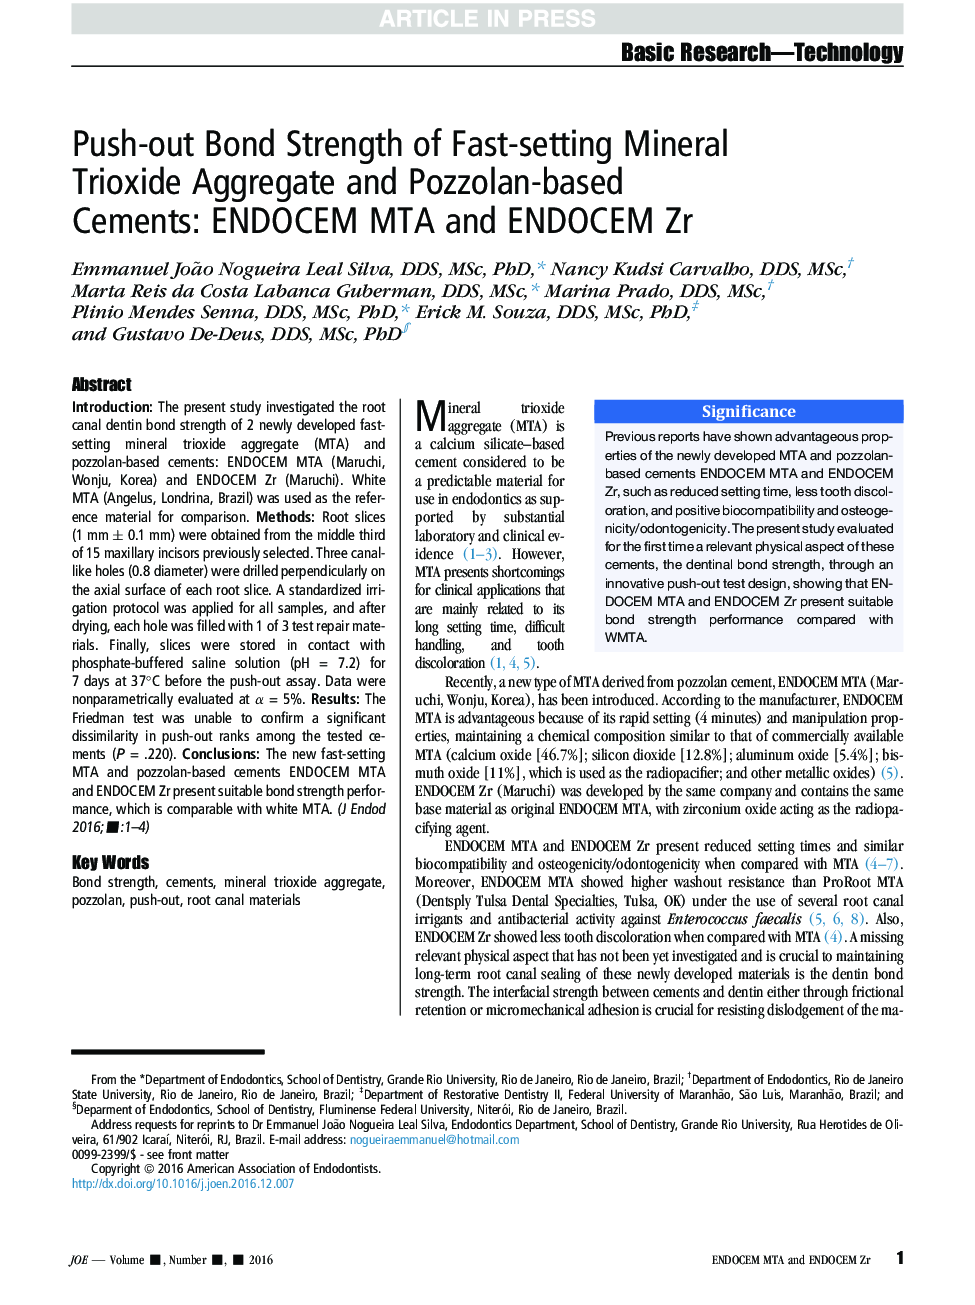 Push-out Bond Strength of Fast-setting Mineral Trioxide Aggregate and Pozzolan-based Cements: ENDOCEM MTA and ENDOCEM Zr